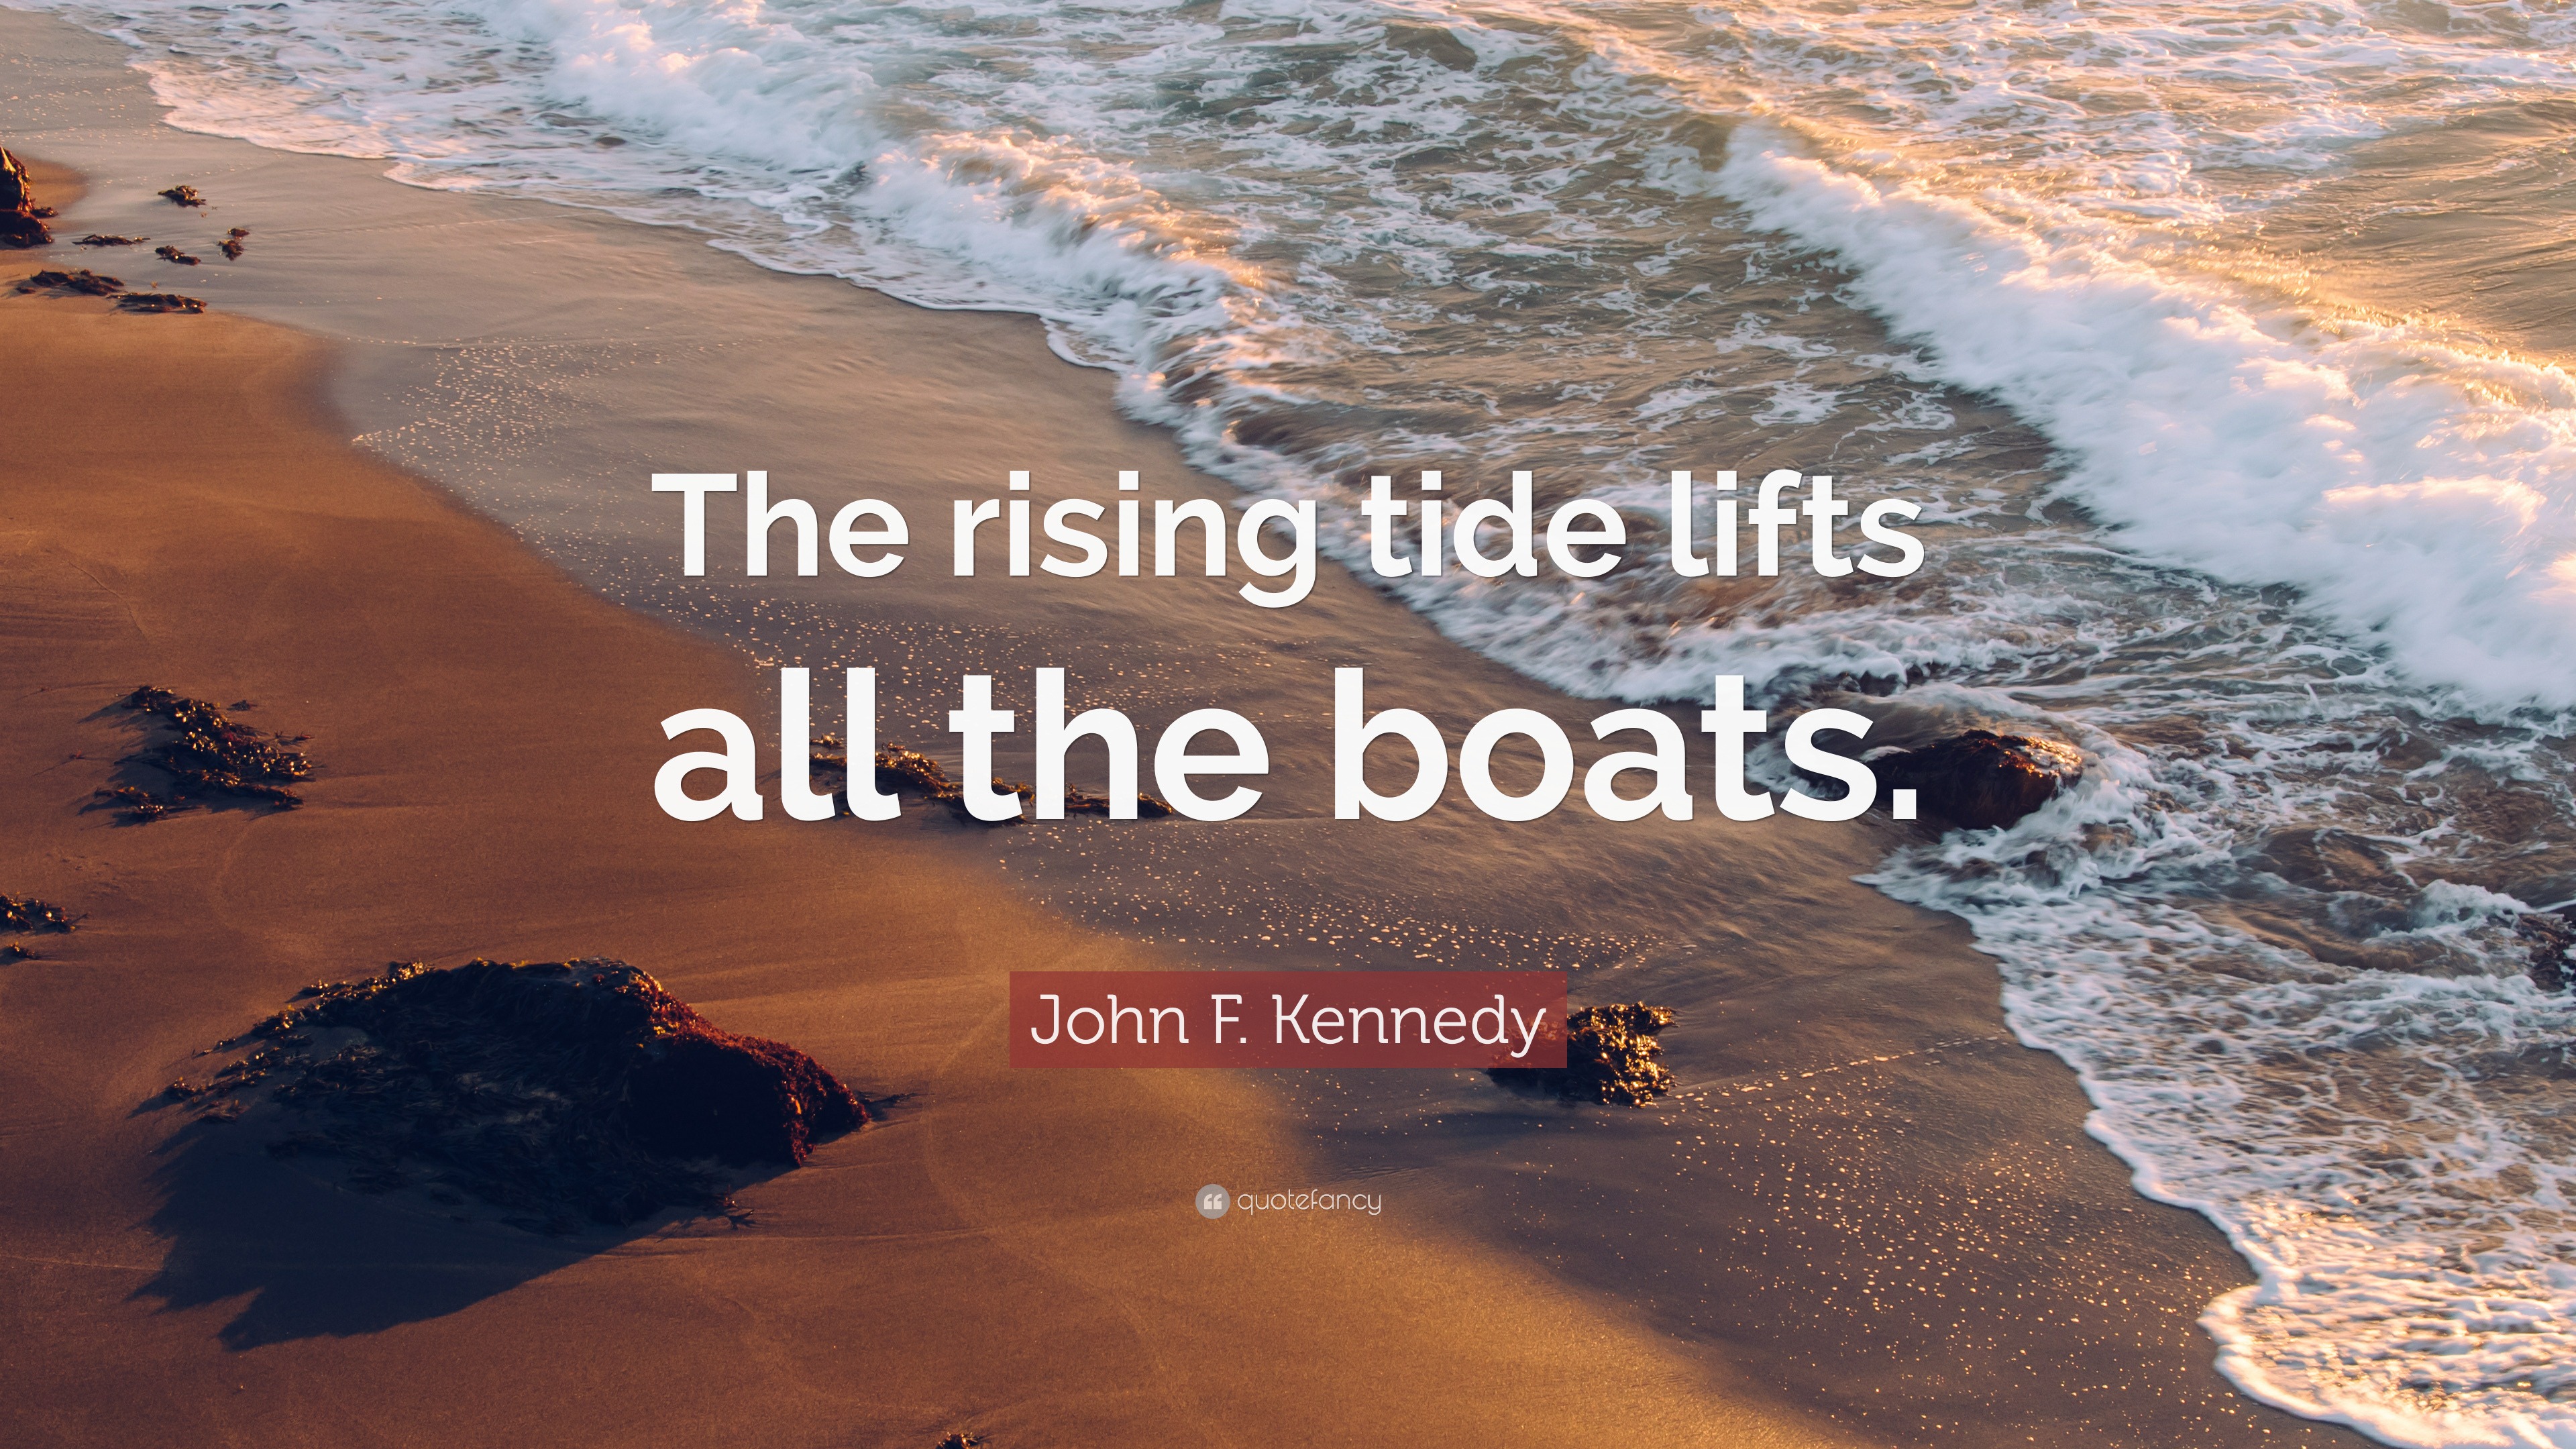 A Rising Tide Lifts All Boats Meaning, Examples, Synonyms